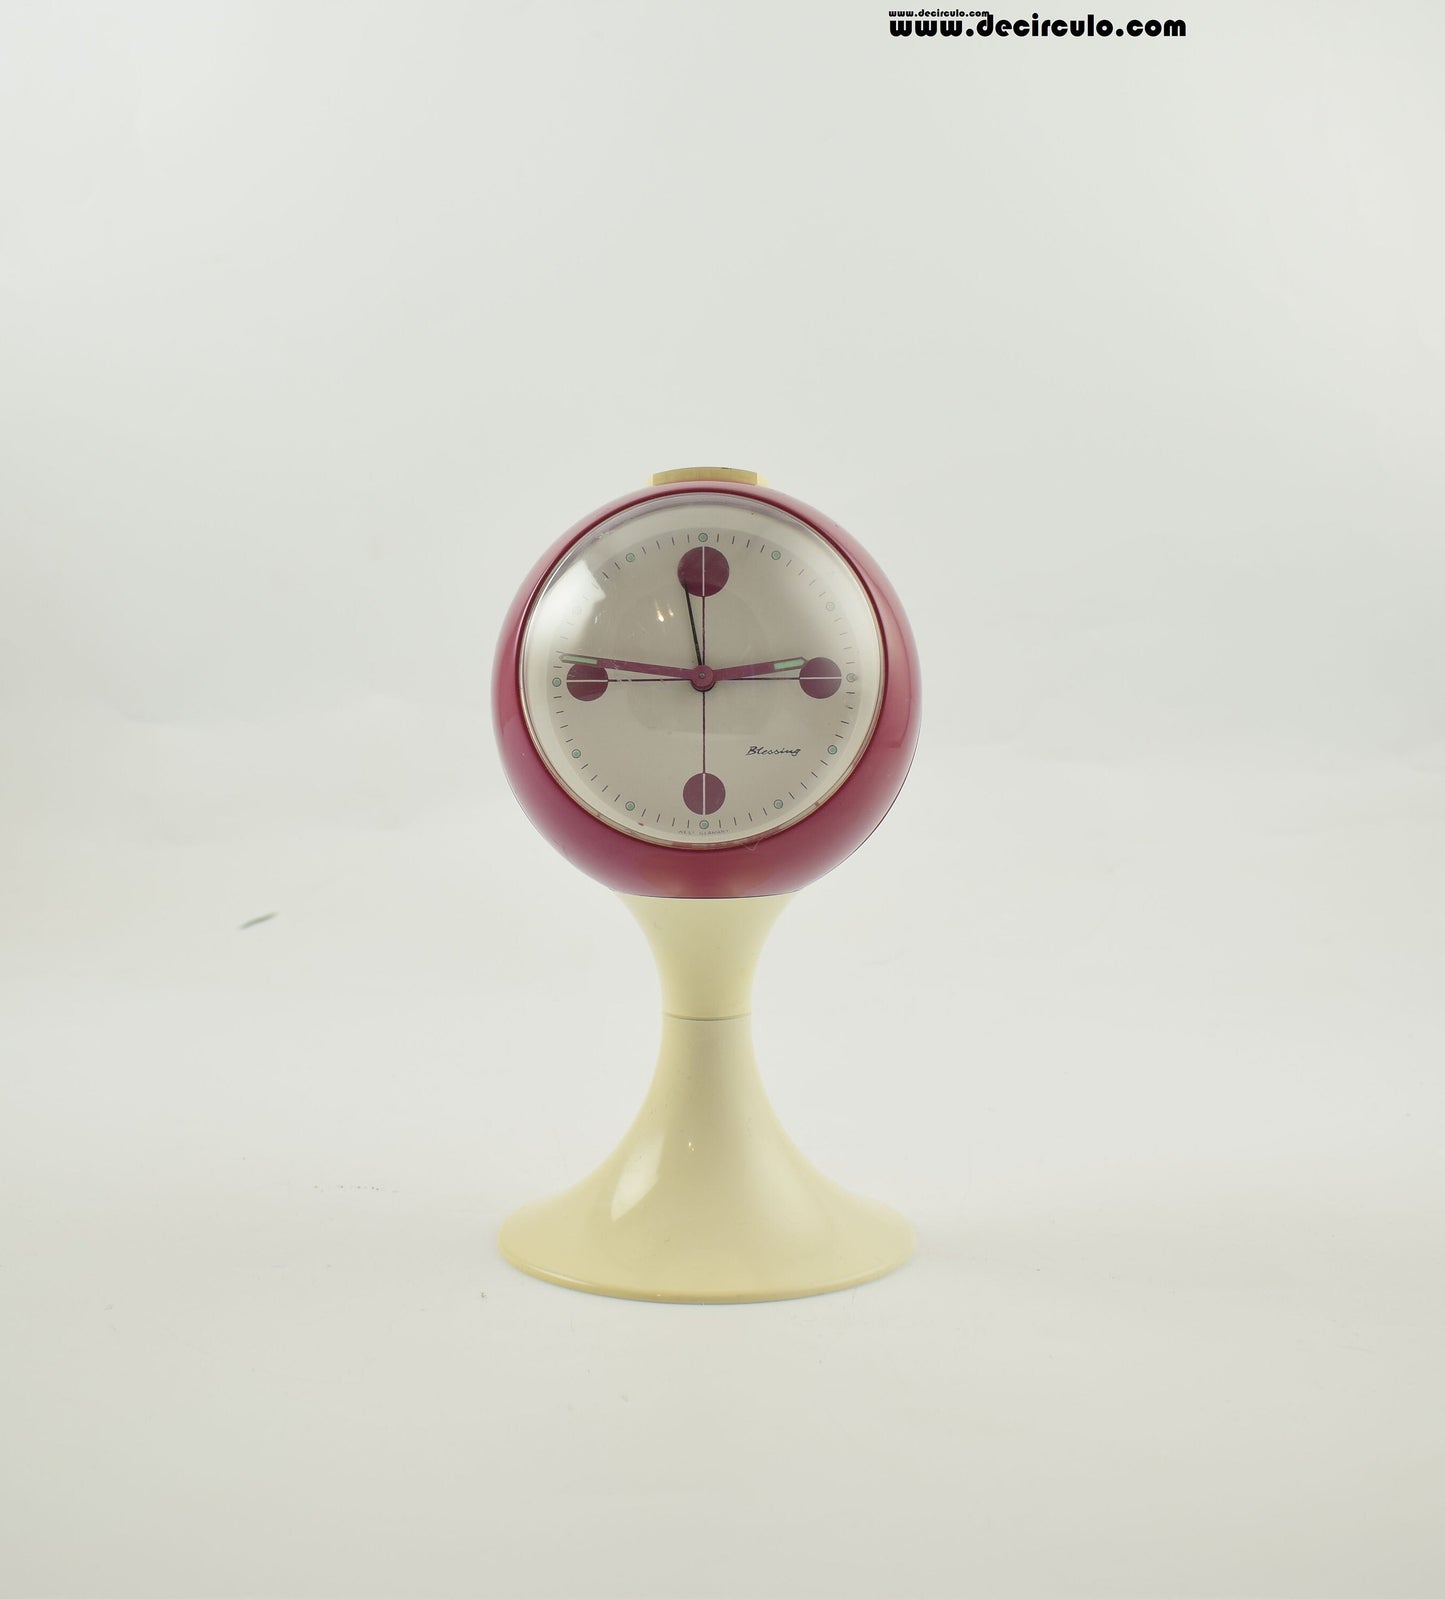 Pedestal alarm clock in a tulip shape, made by Blessing, west Germany, in the early seventies.